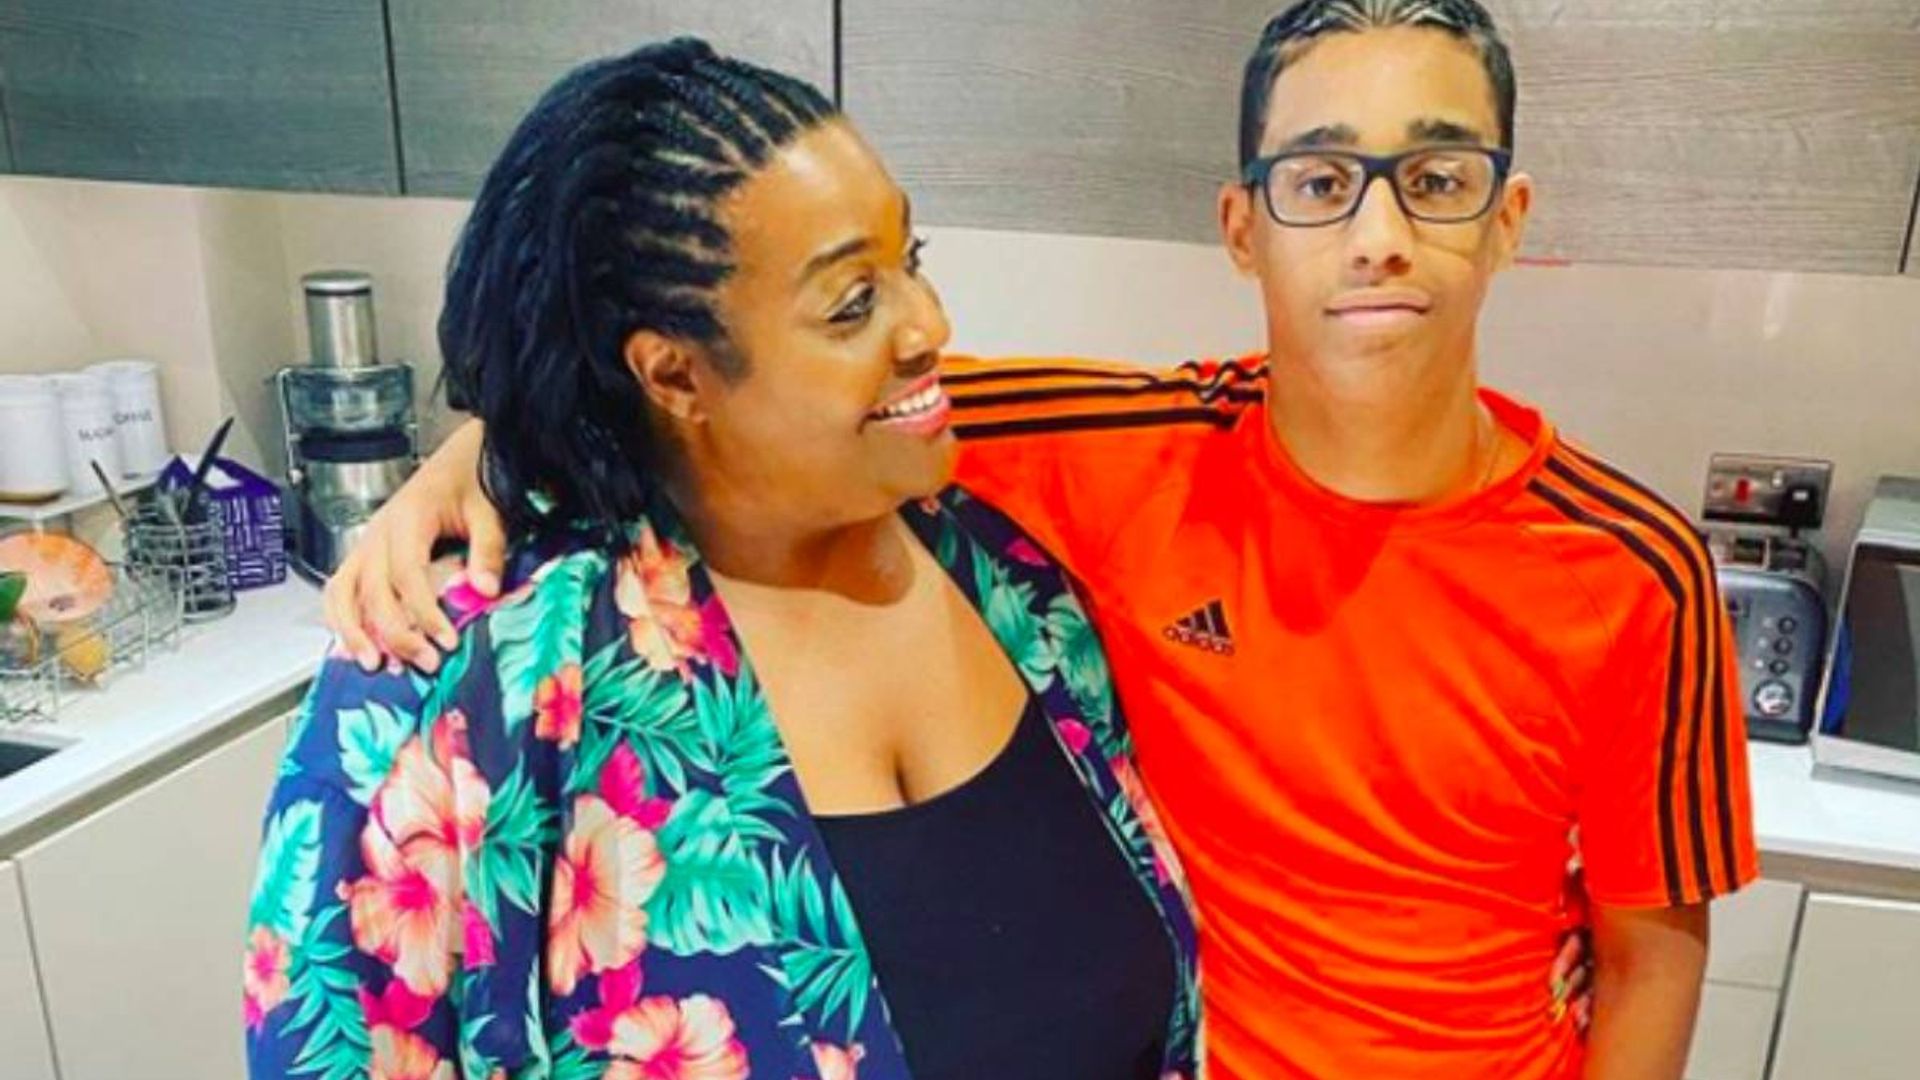 Alison Hammond and her son Aidan suffer major cooking fail in hilarious new video